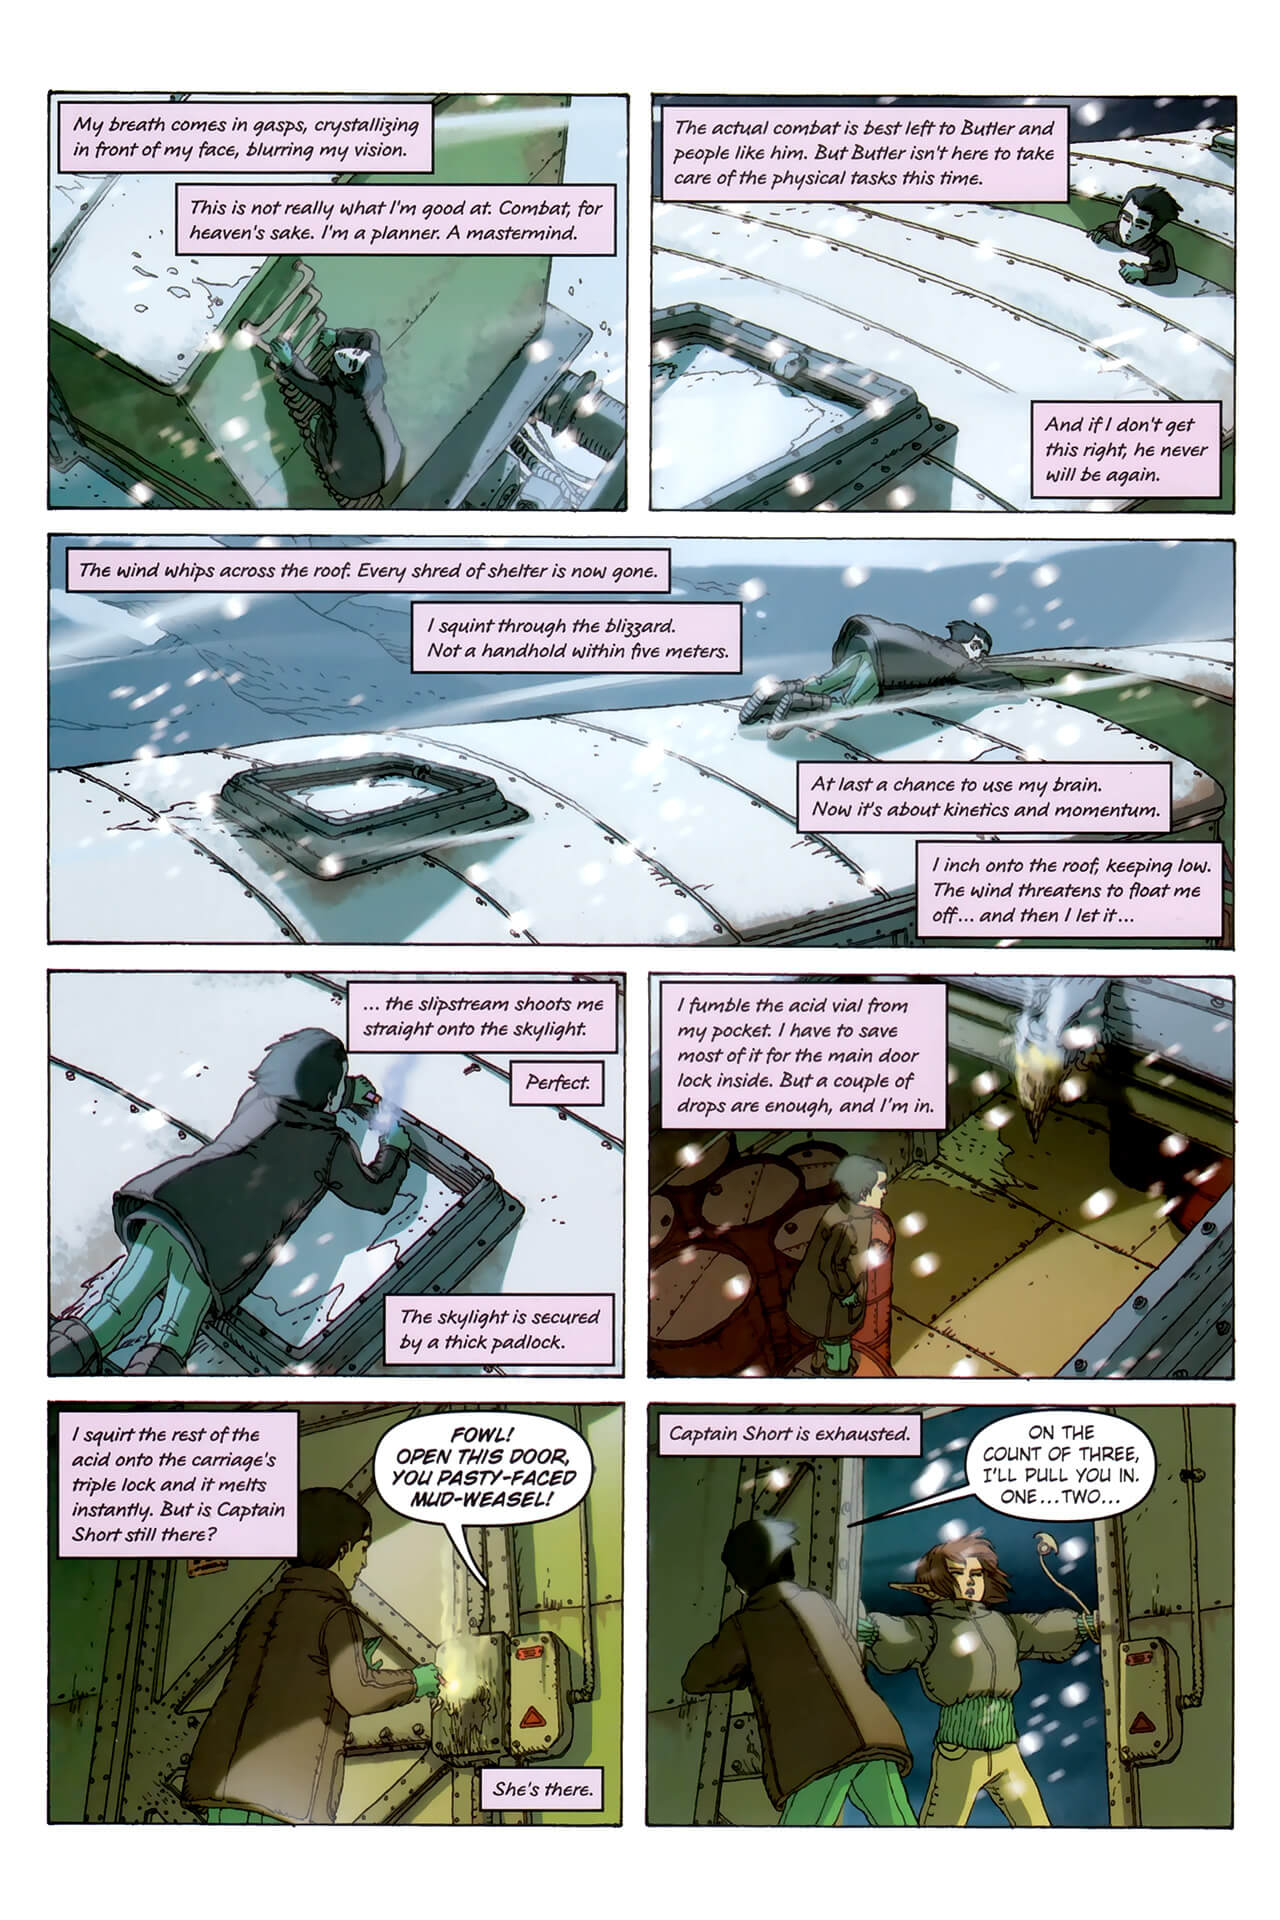 page 62 of artemis fowl the arctic incident graphic novel